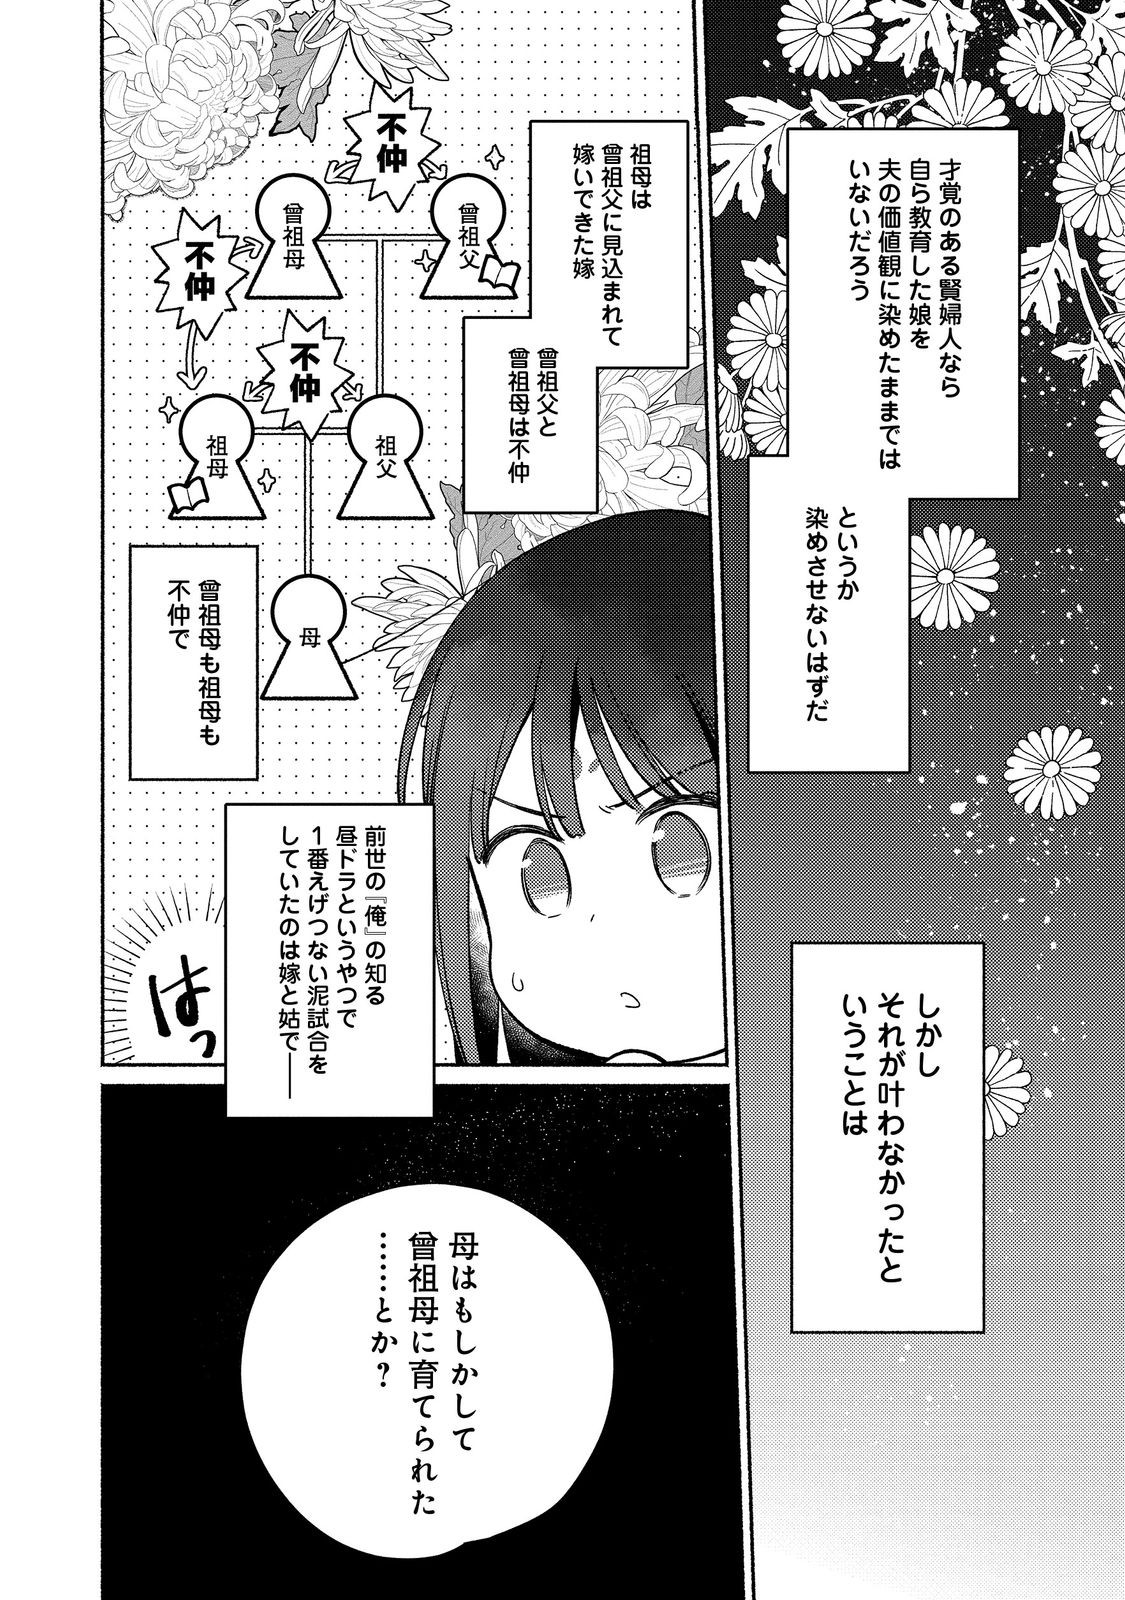 I’m the White Pig Nobleman 第25.1話 - Page 8